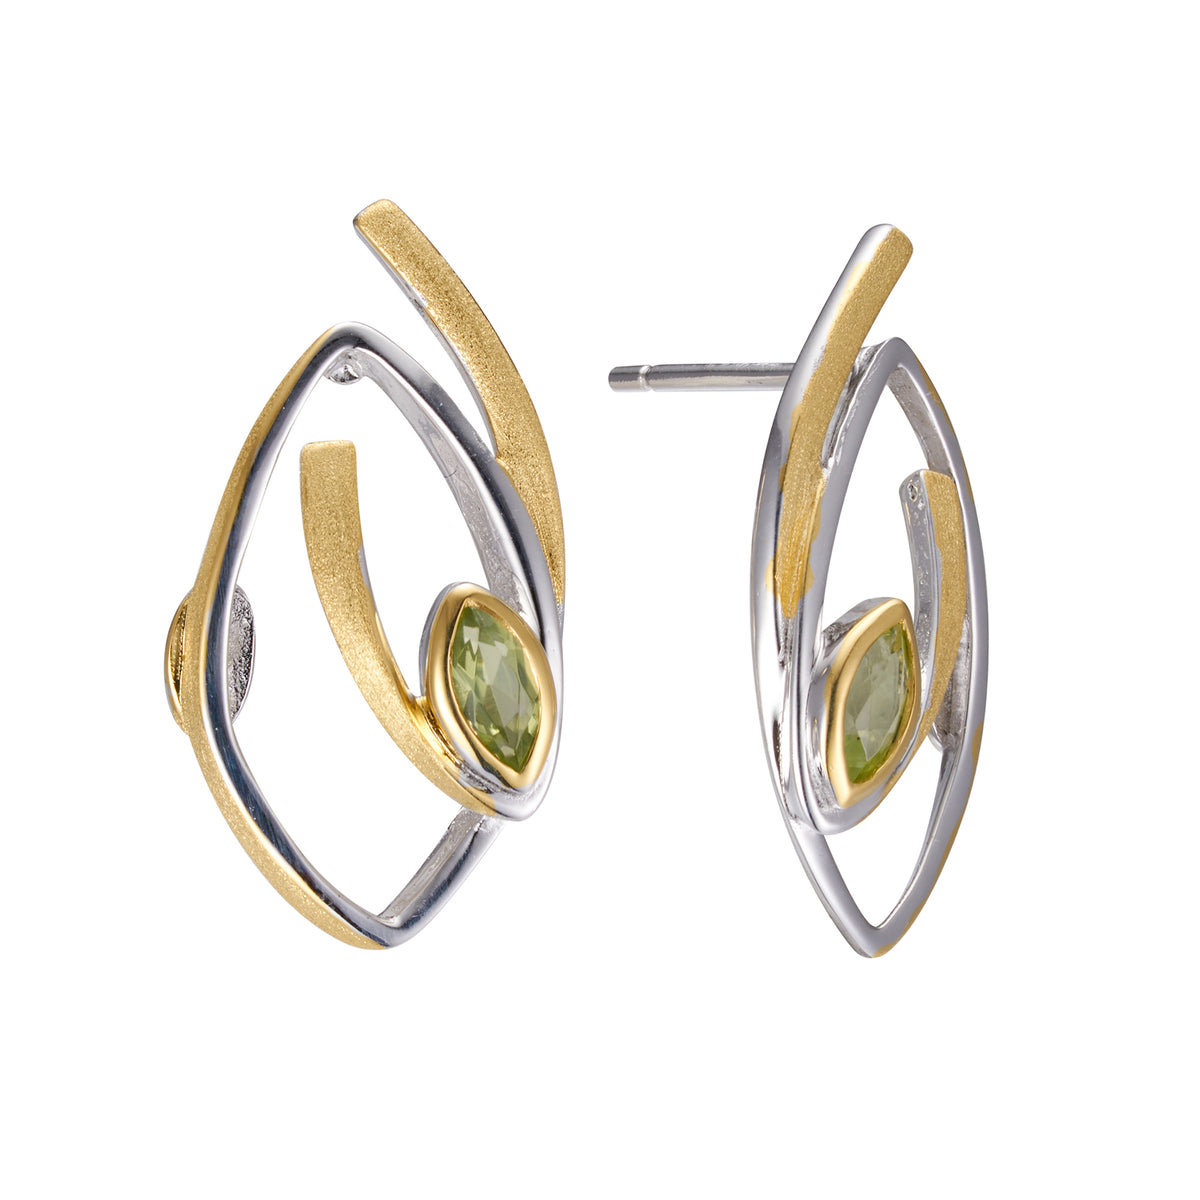 A pair of silver earrings, gold plated with yellow citrine stones.